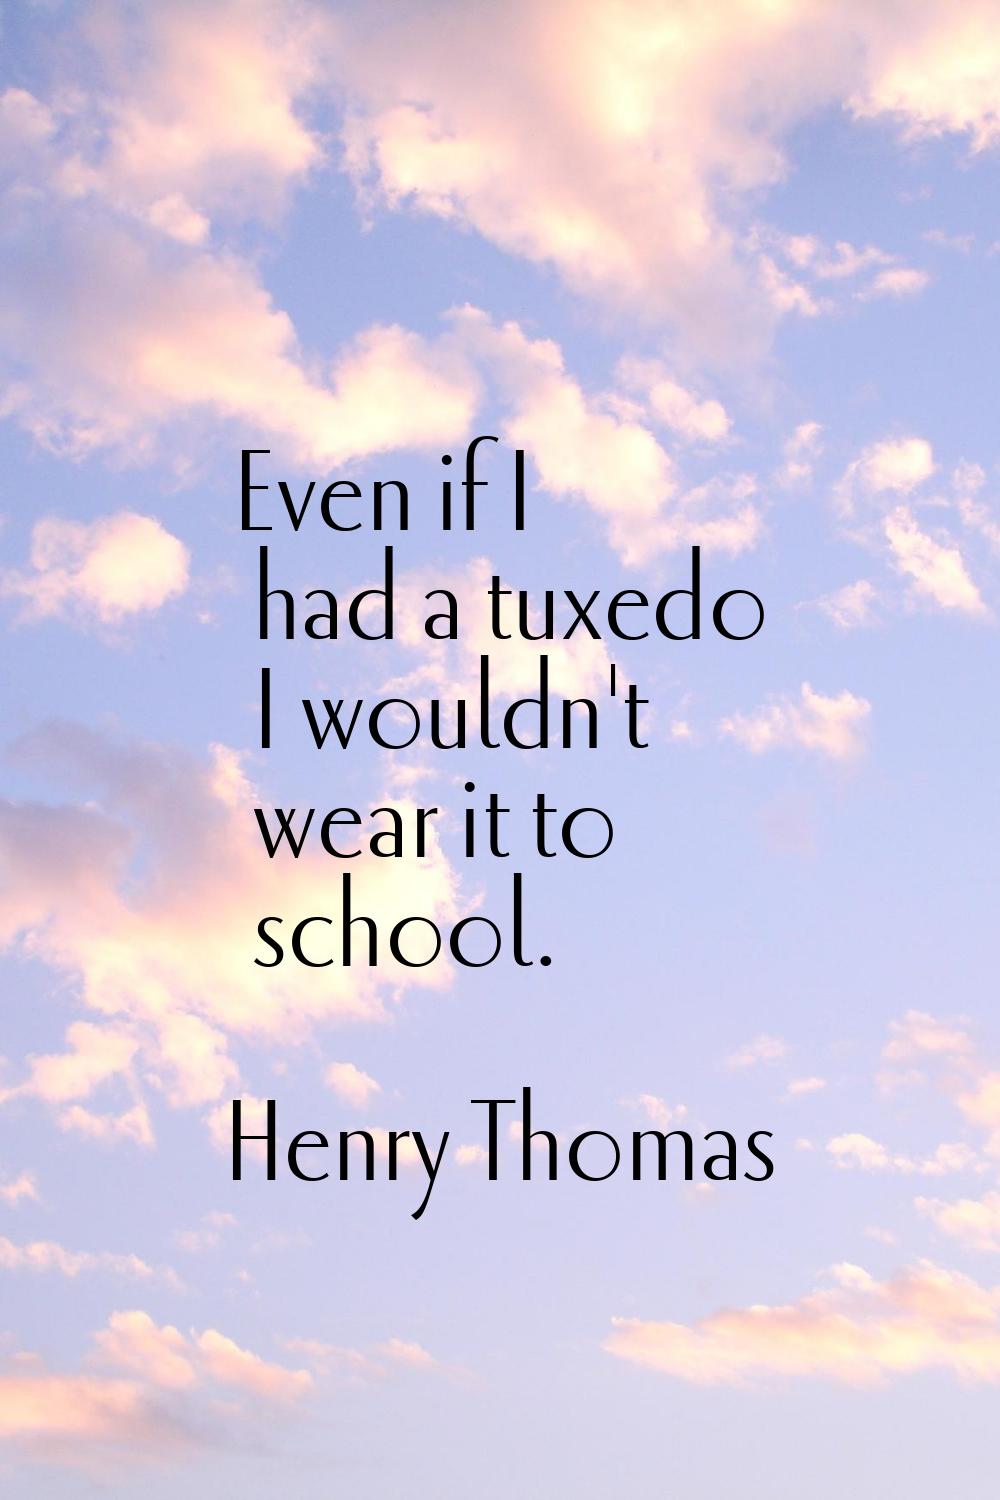 Even if I had a tuxedo I wouldn't wear it to school.